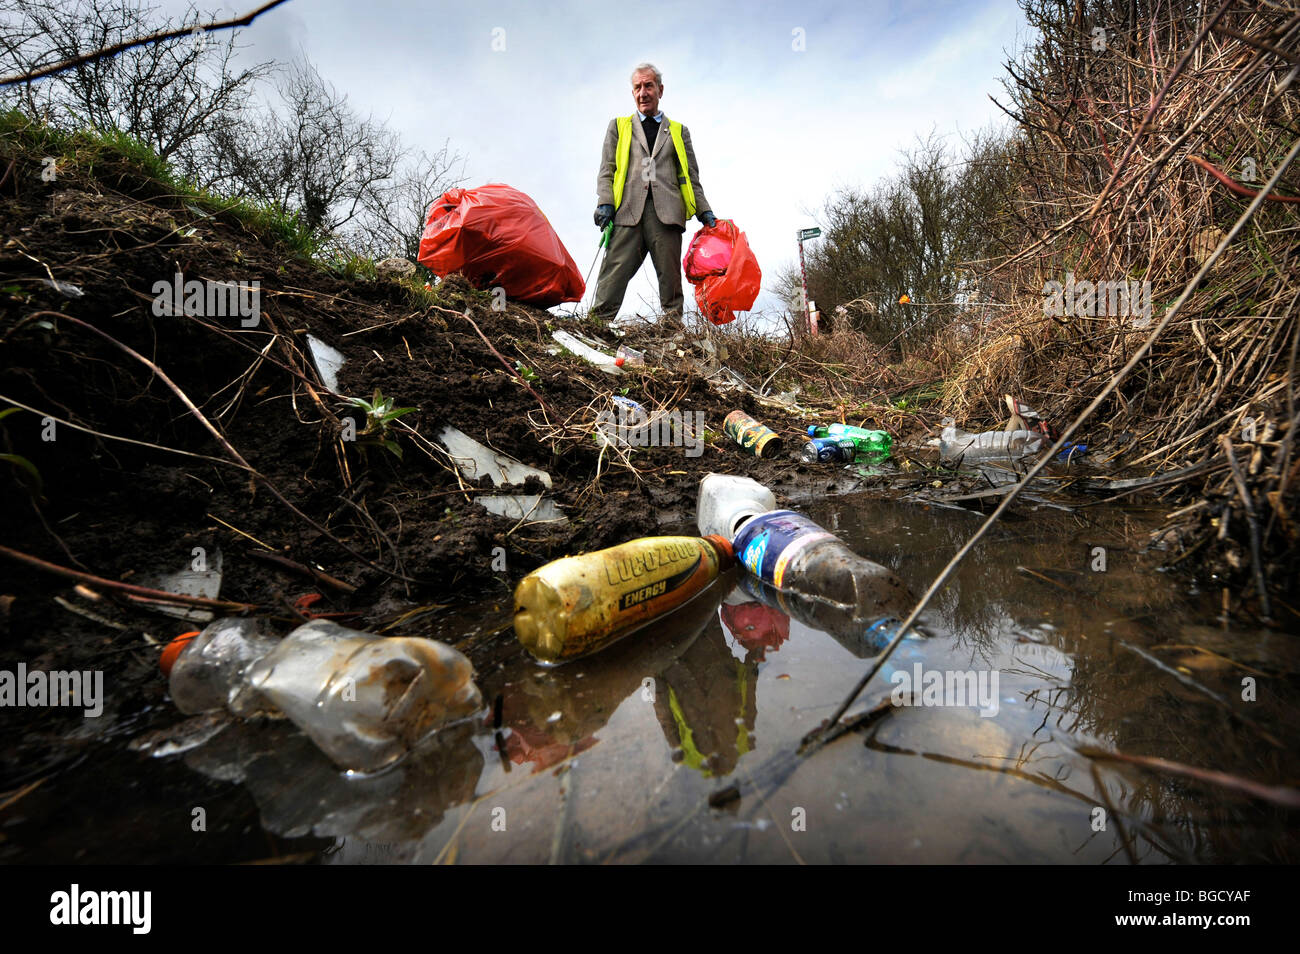 Stan Stone from Lower Apperley Gloucestershire UK who voluntarily collects litter in the area Stock Photo